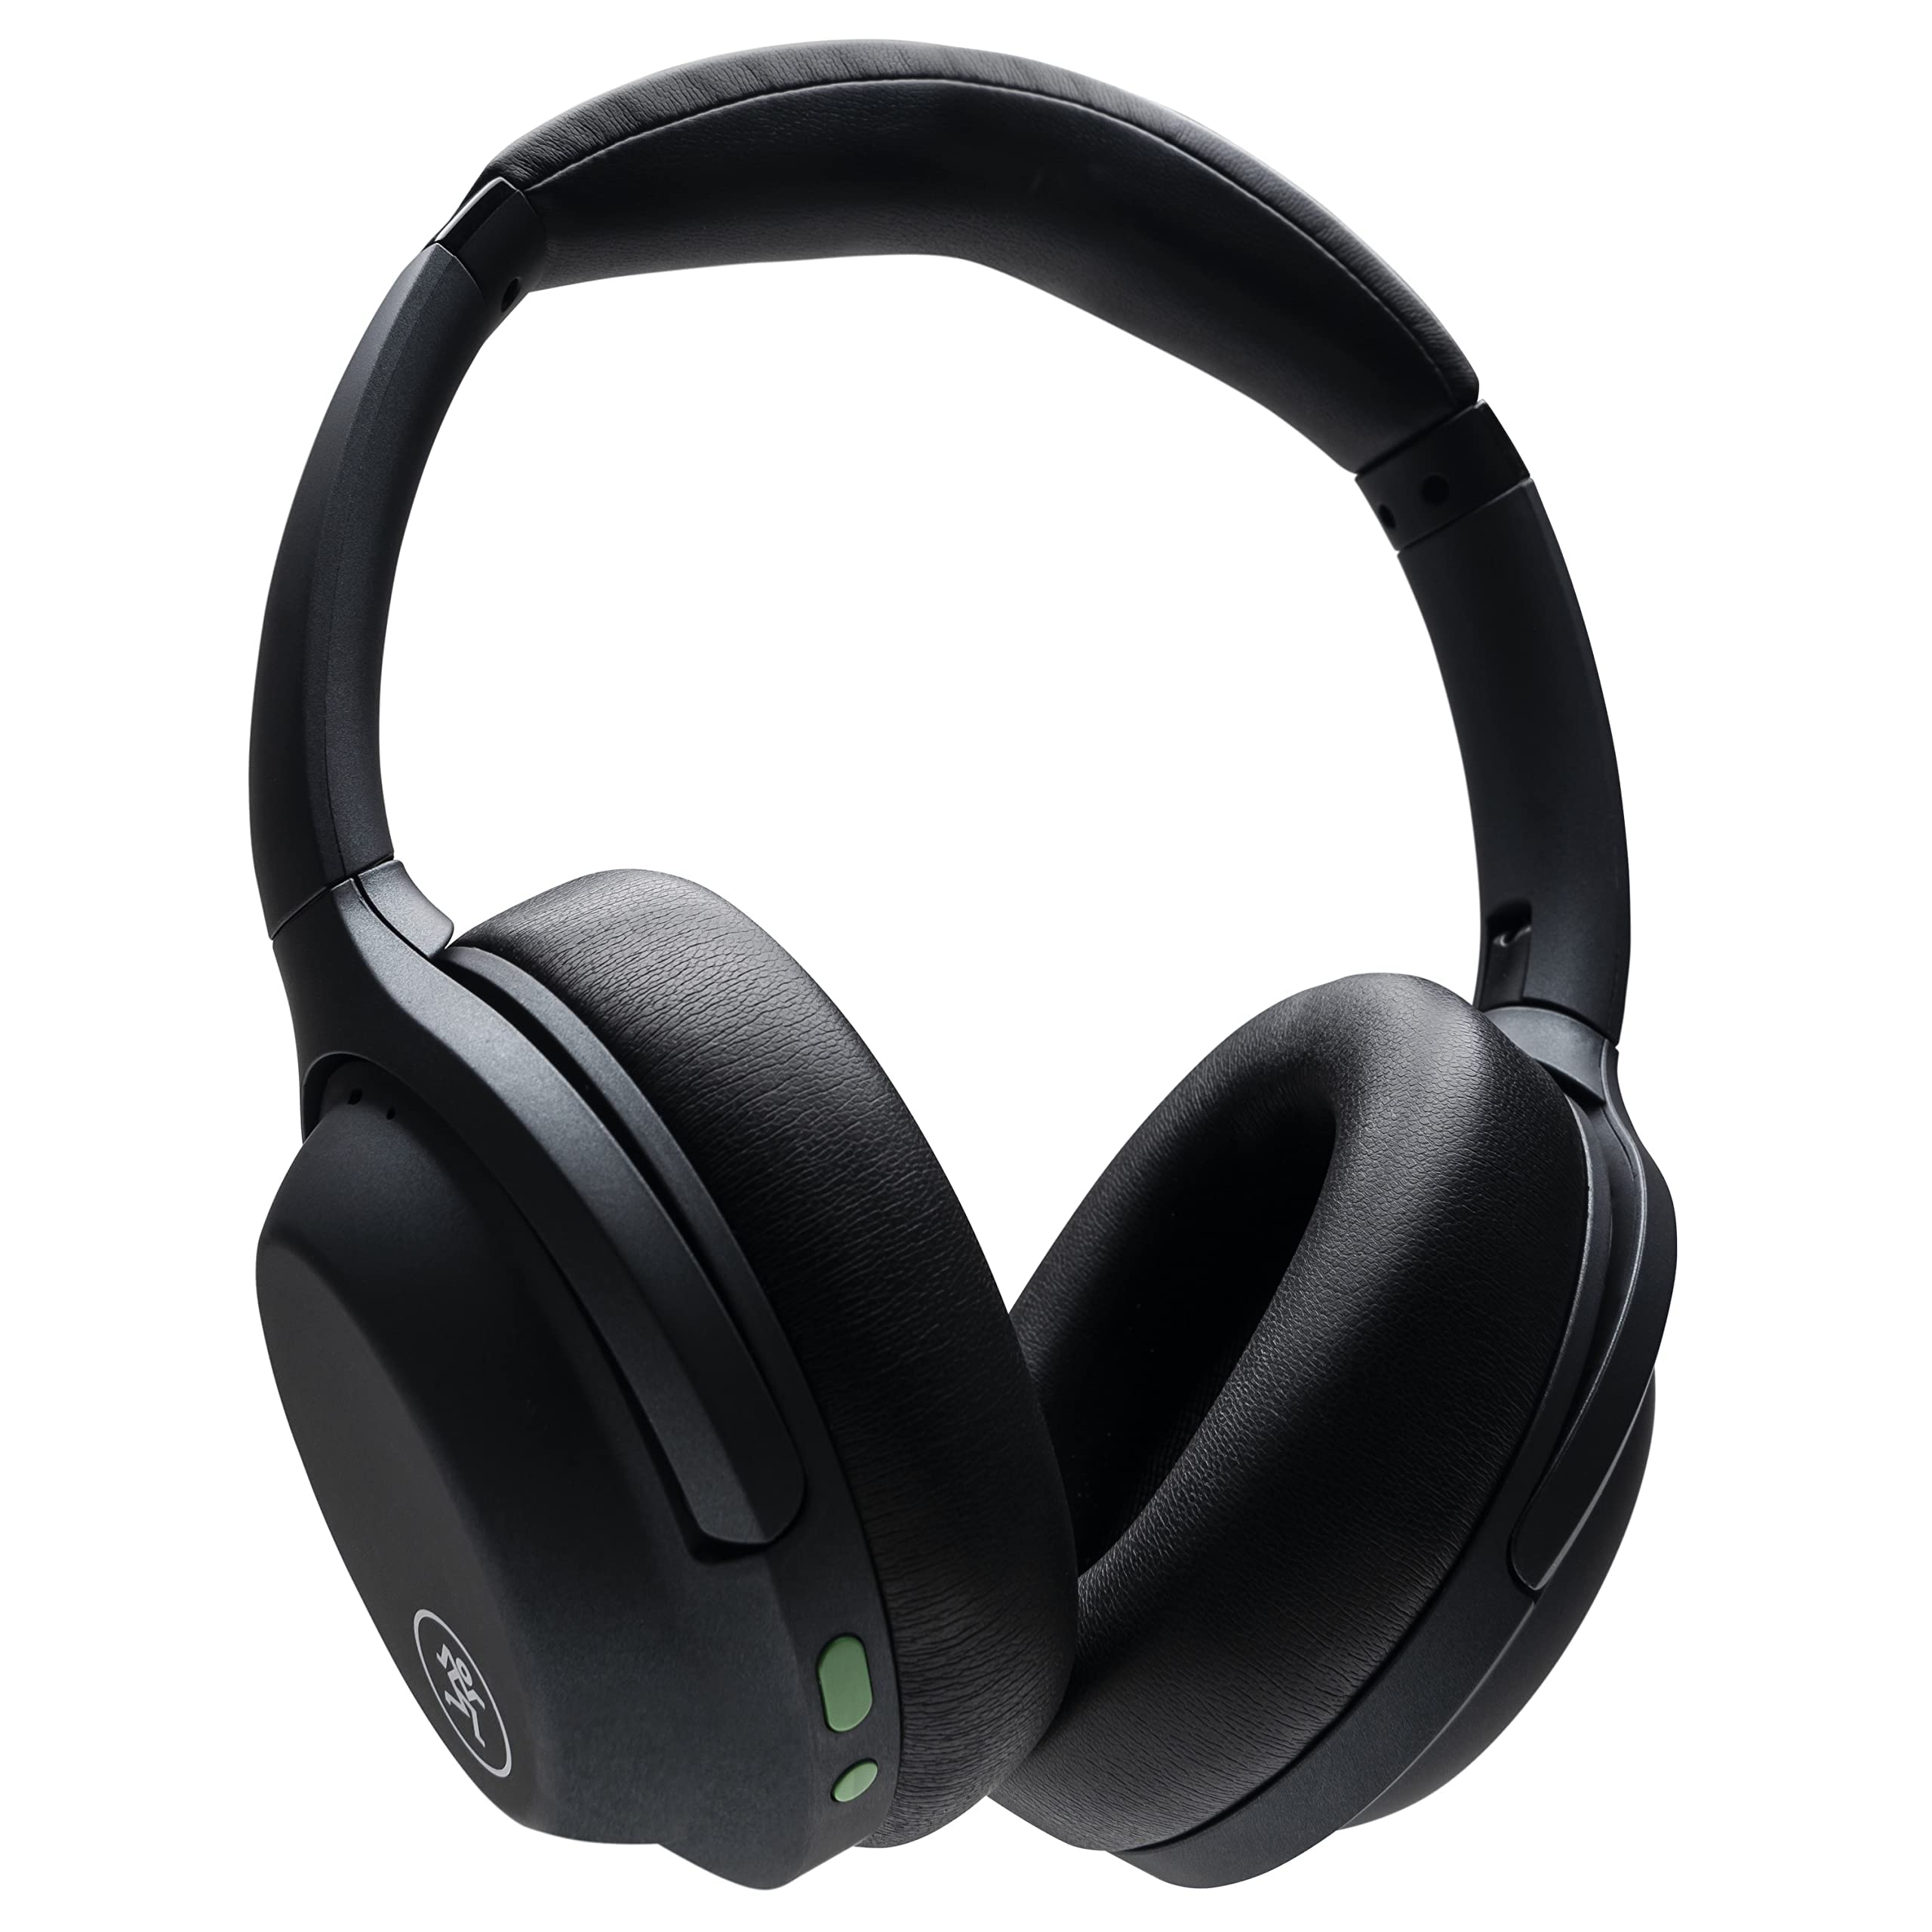 Mackie MC60-BT - Bluetooth Wireless Noise Canceling Headphones with Wireless Charging Pad